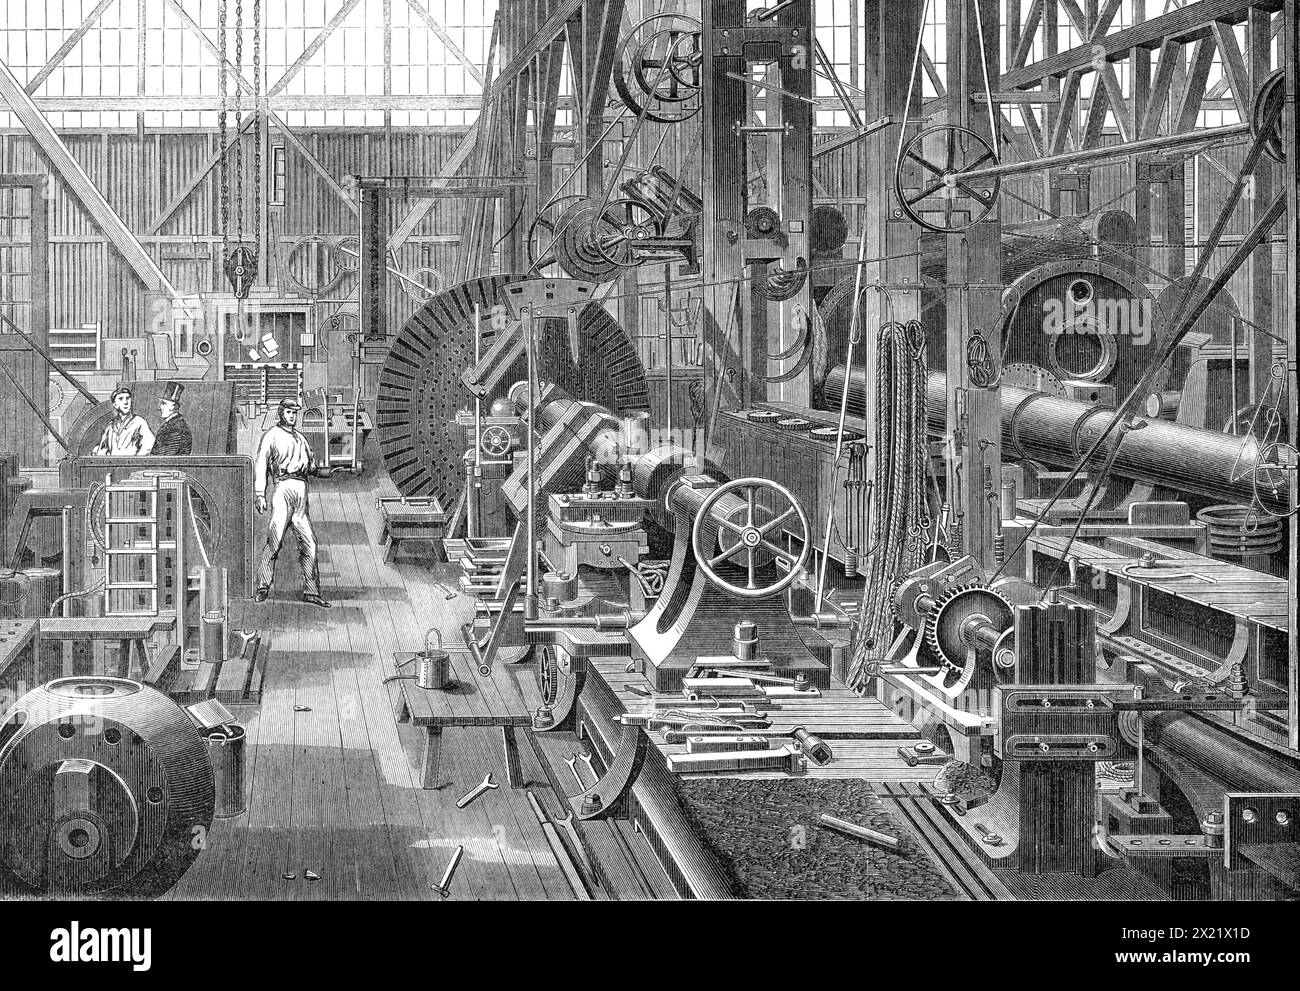 A visit to Penn's Marine Engine Factory, at Greenwich: turning a crank axle, 1865. Illustration representing '...the operation of turning a crank-axle in a mighty lathe...The various fitting and tool-shops at Greenwich are constructed upon the most approved modern plans. Every part of each shop is fully lighted in every direction, and the machinery and tools combine all the most recent improvements. The premises cover seven acres of ground, and in them are employed about 1300 men and boys. Here all the castings are made, some of immense size, from 20 to 30 tons of metal being run into some of Stock Photo